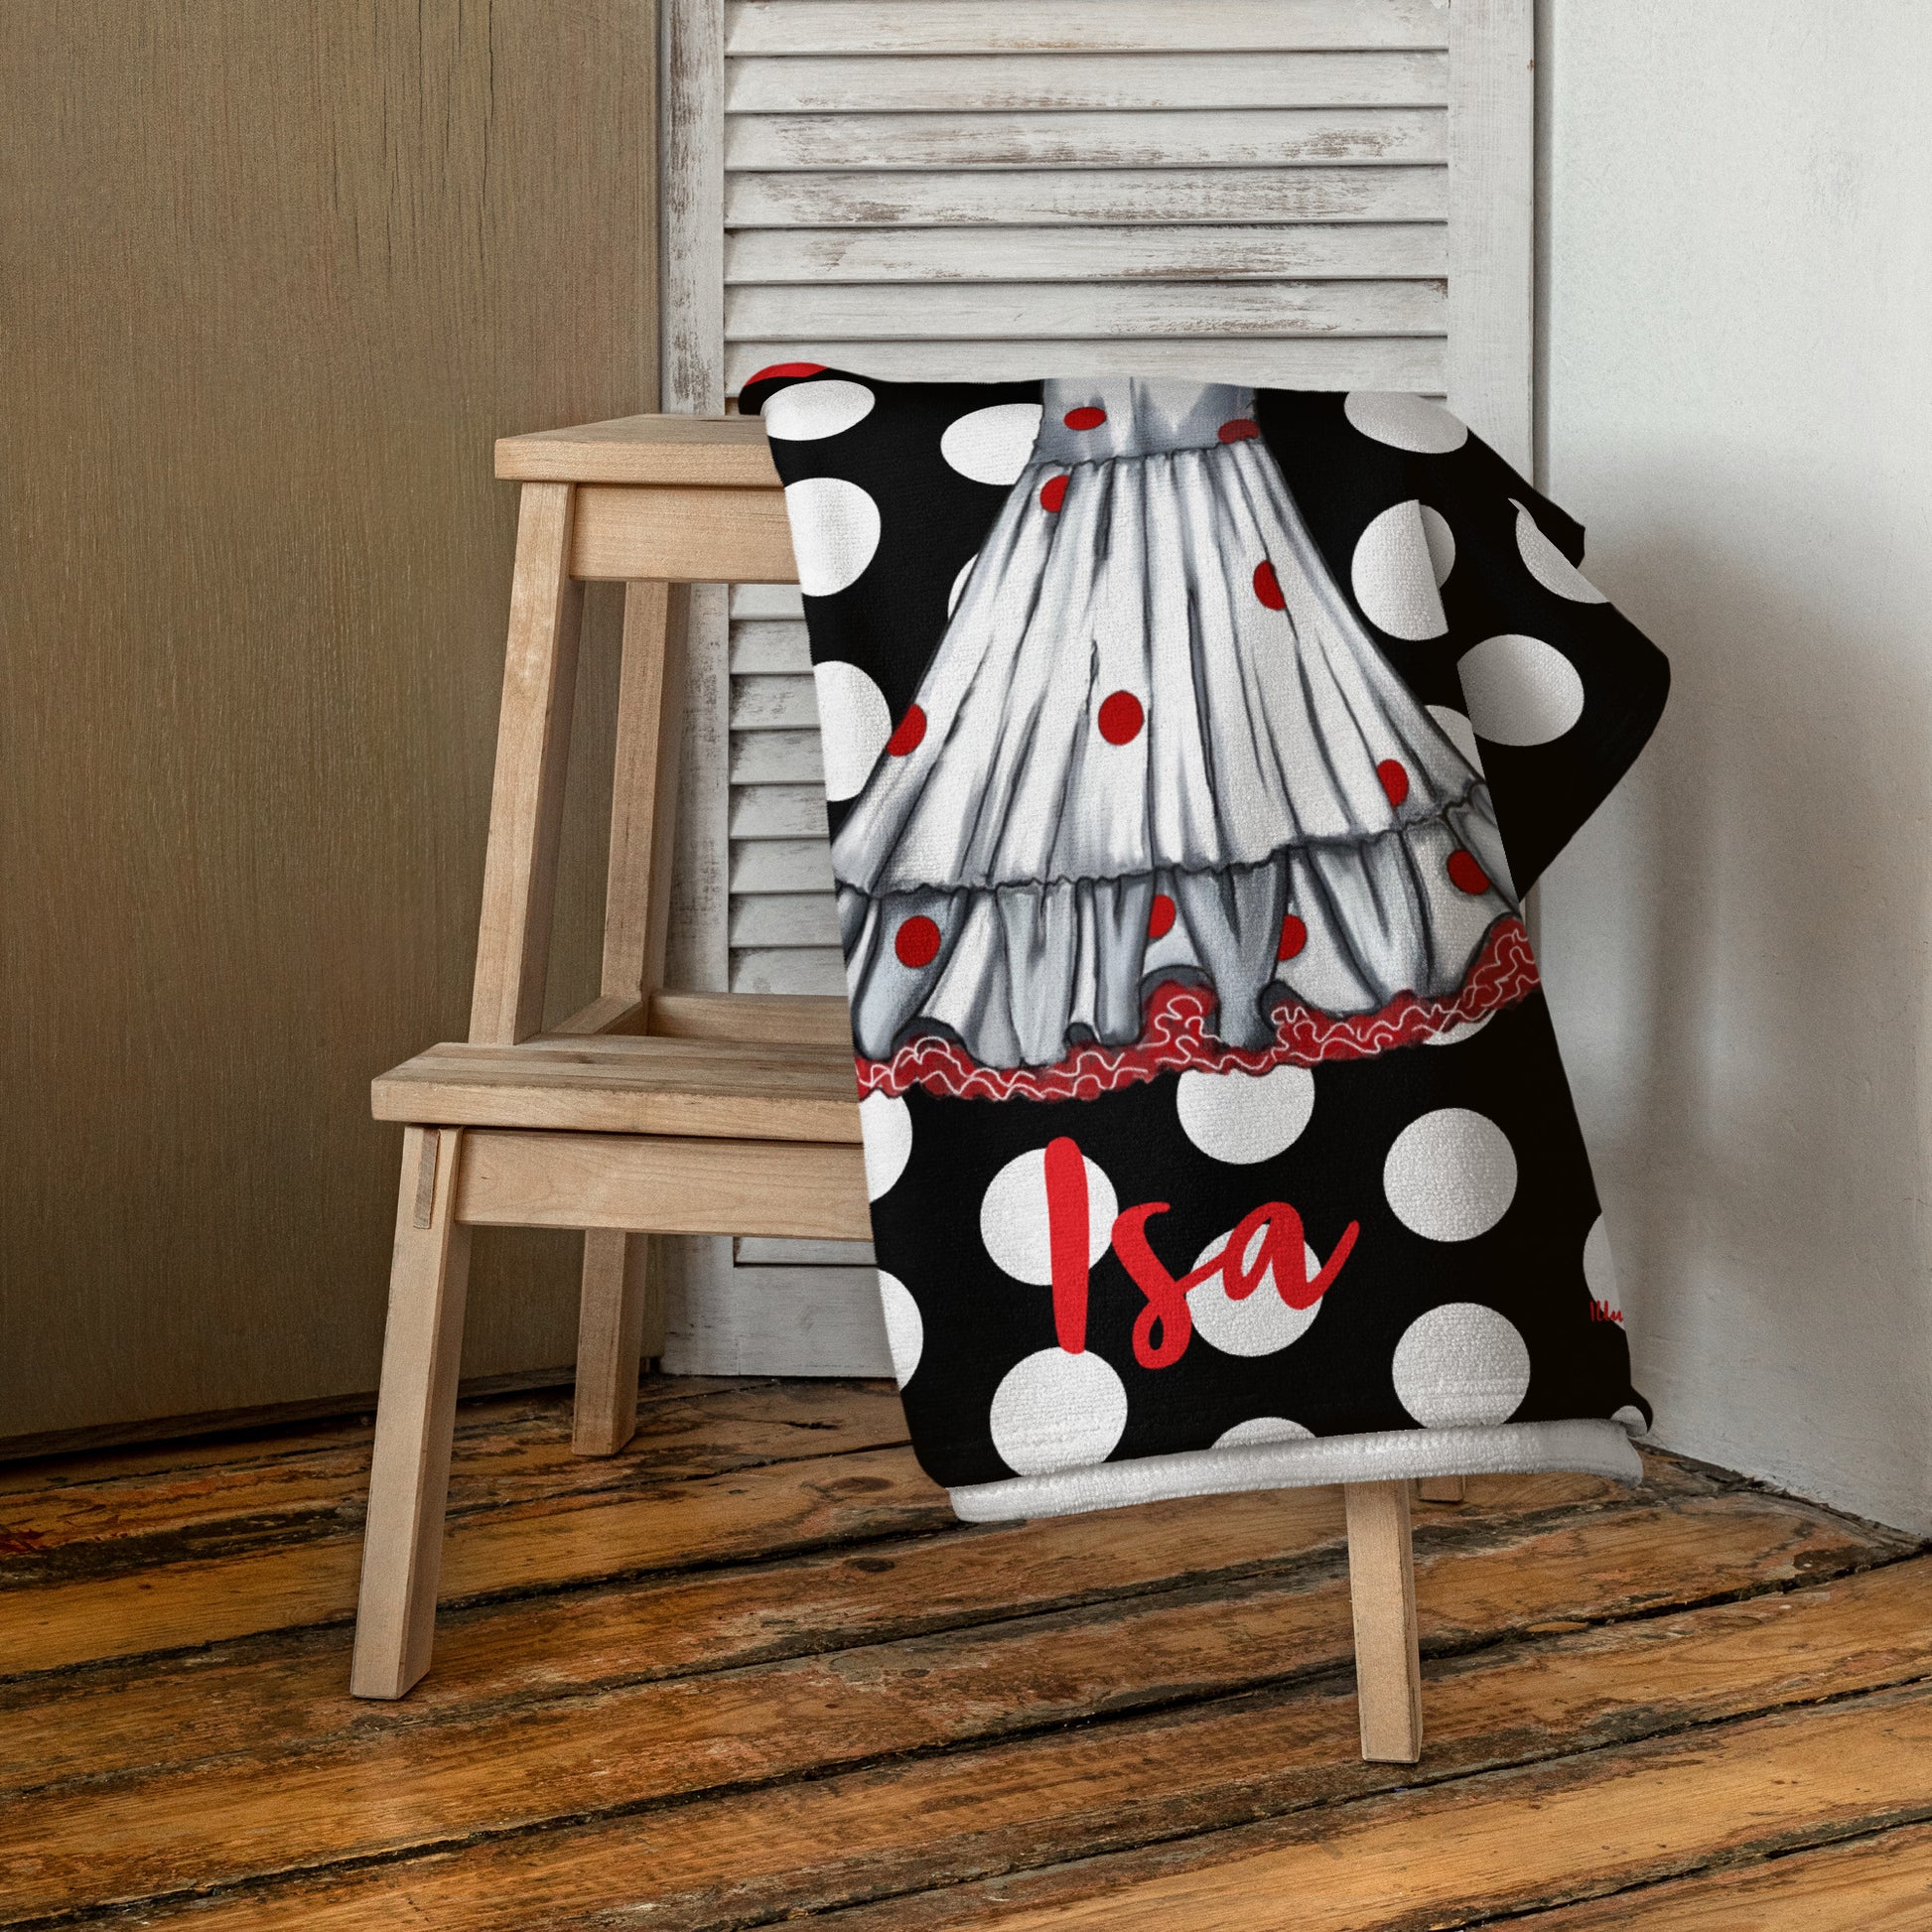 a black and white polka dot chair with a red and white umbrella